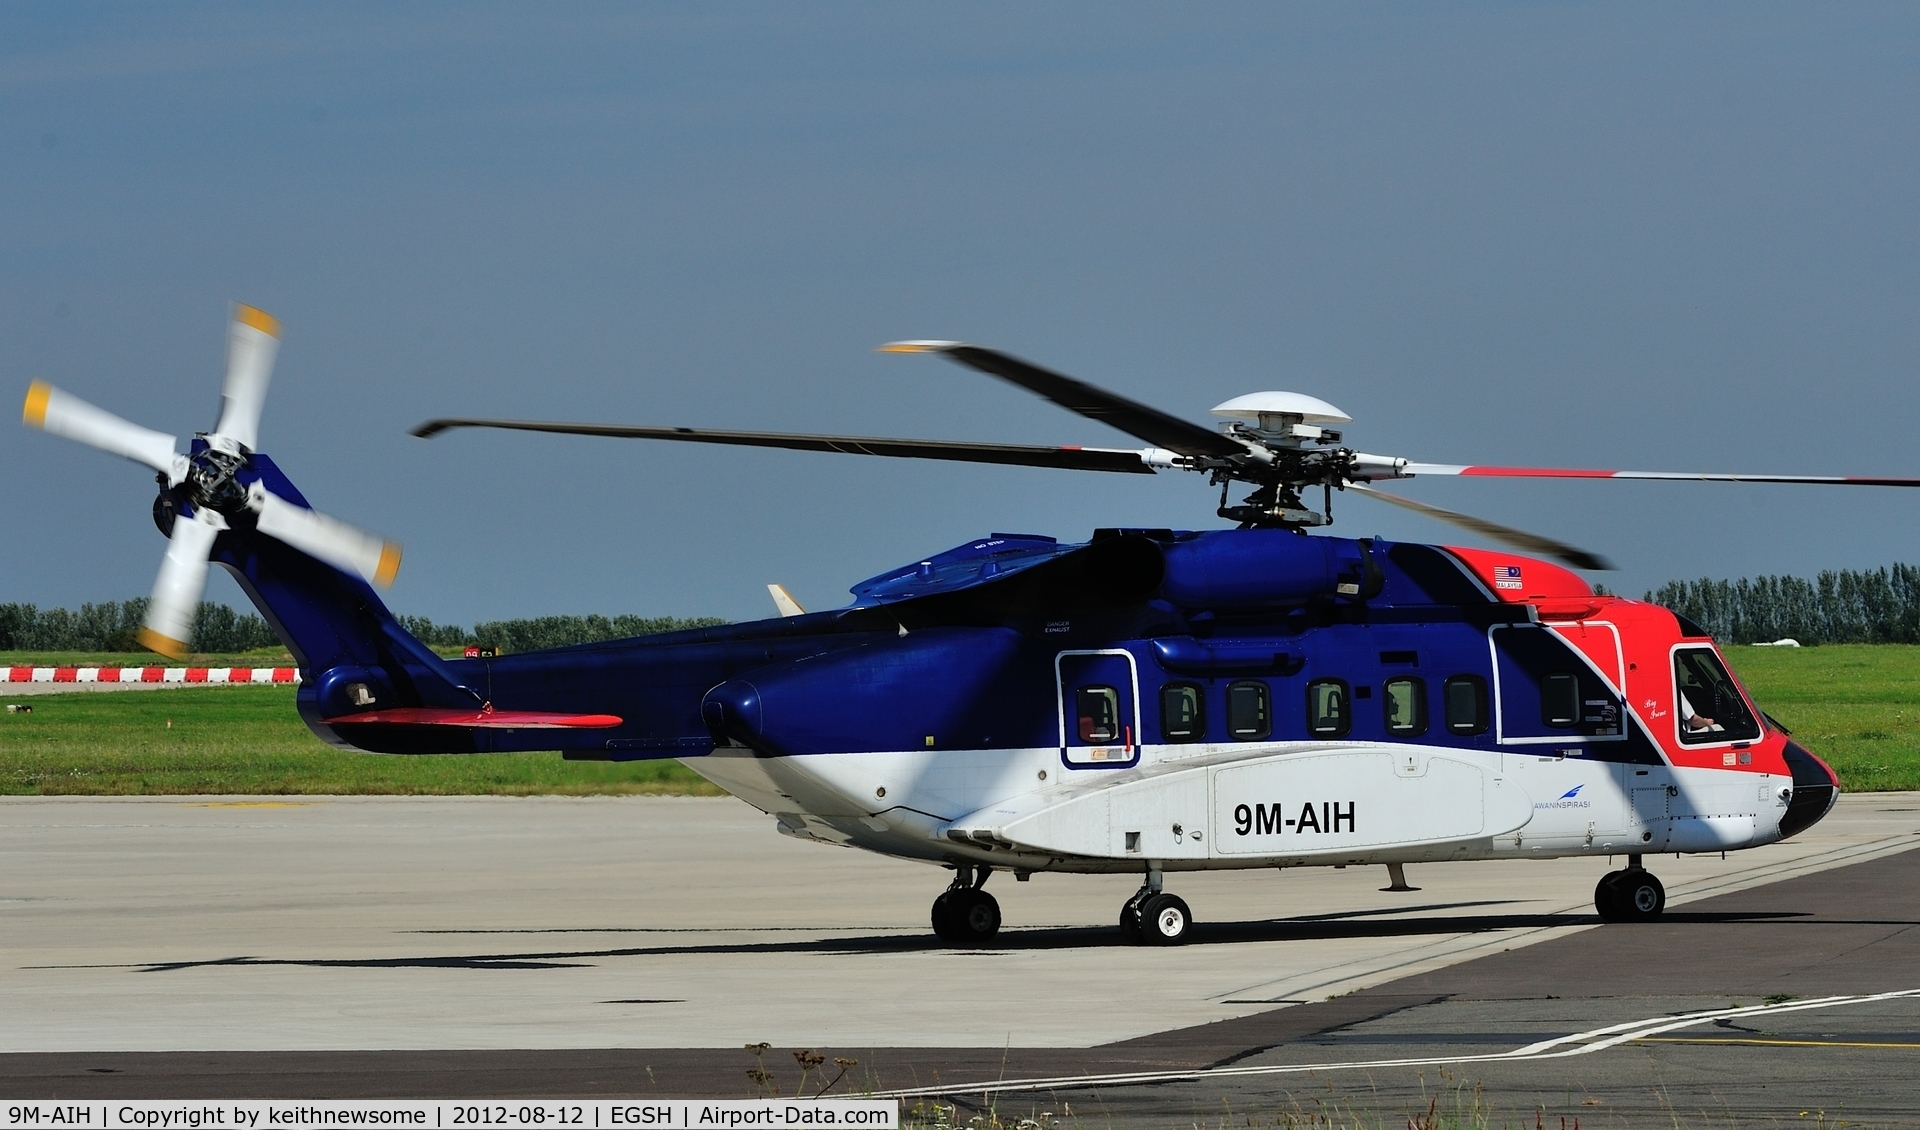 9M-AIH, 2005 Sikorsky S-92A C/N 920024, Leaving after fuel stop on a trip to Aberdeen.